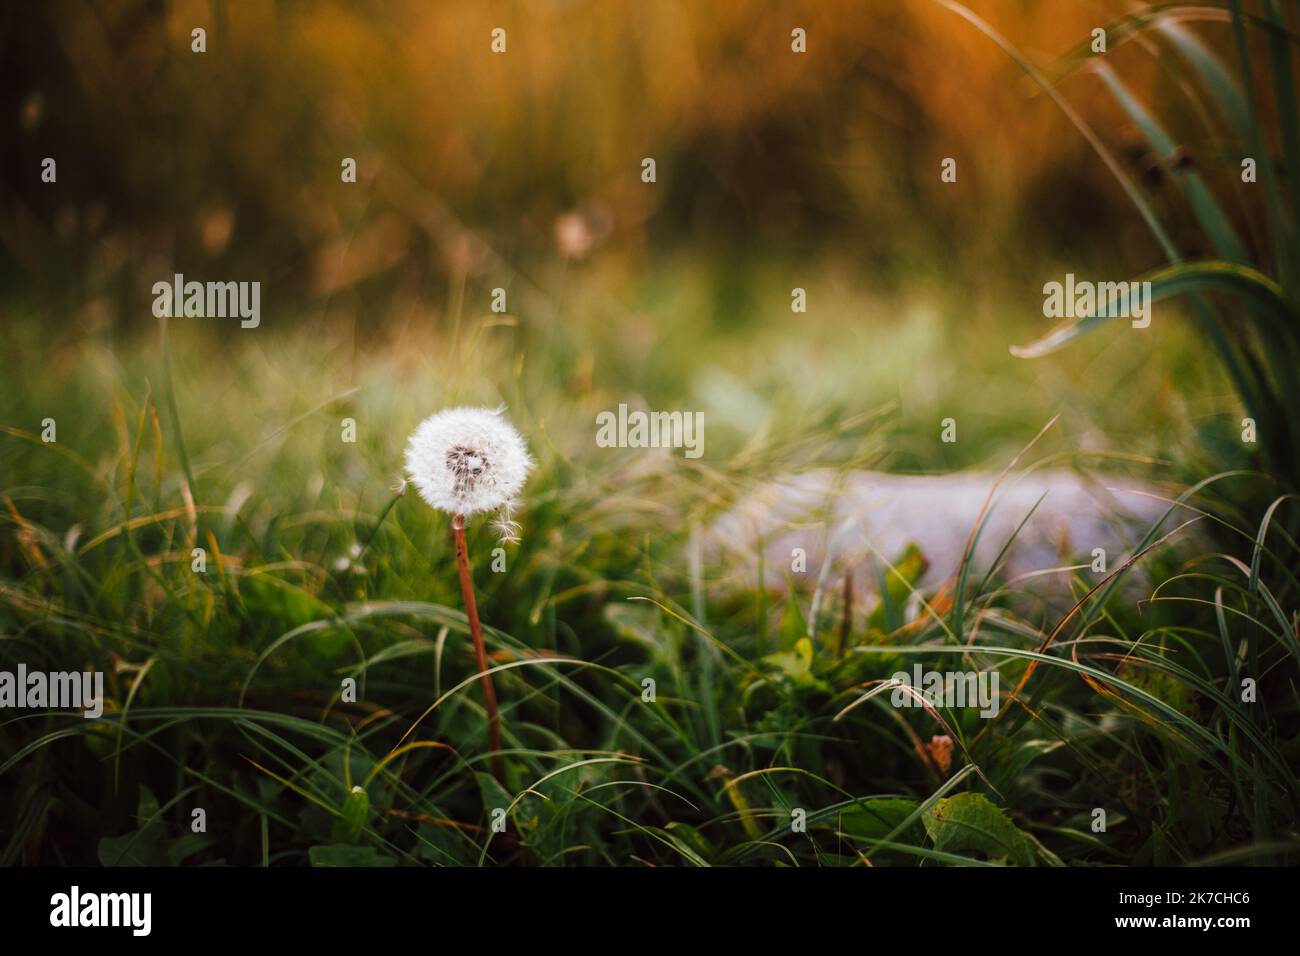 Dandelion growing on field in park during autumn Stock Photo